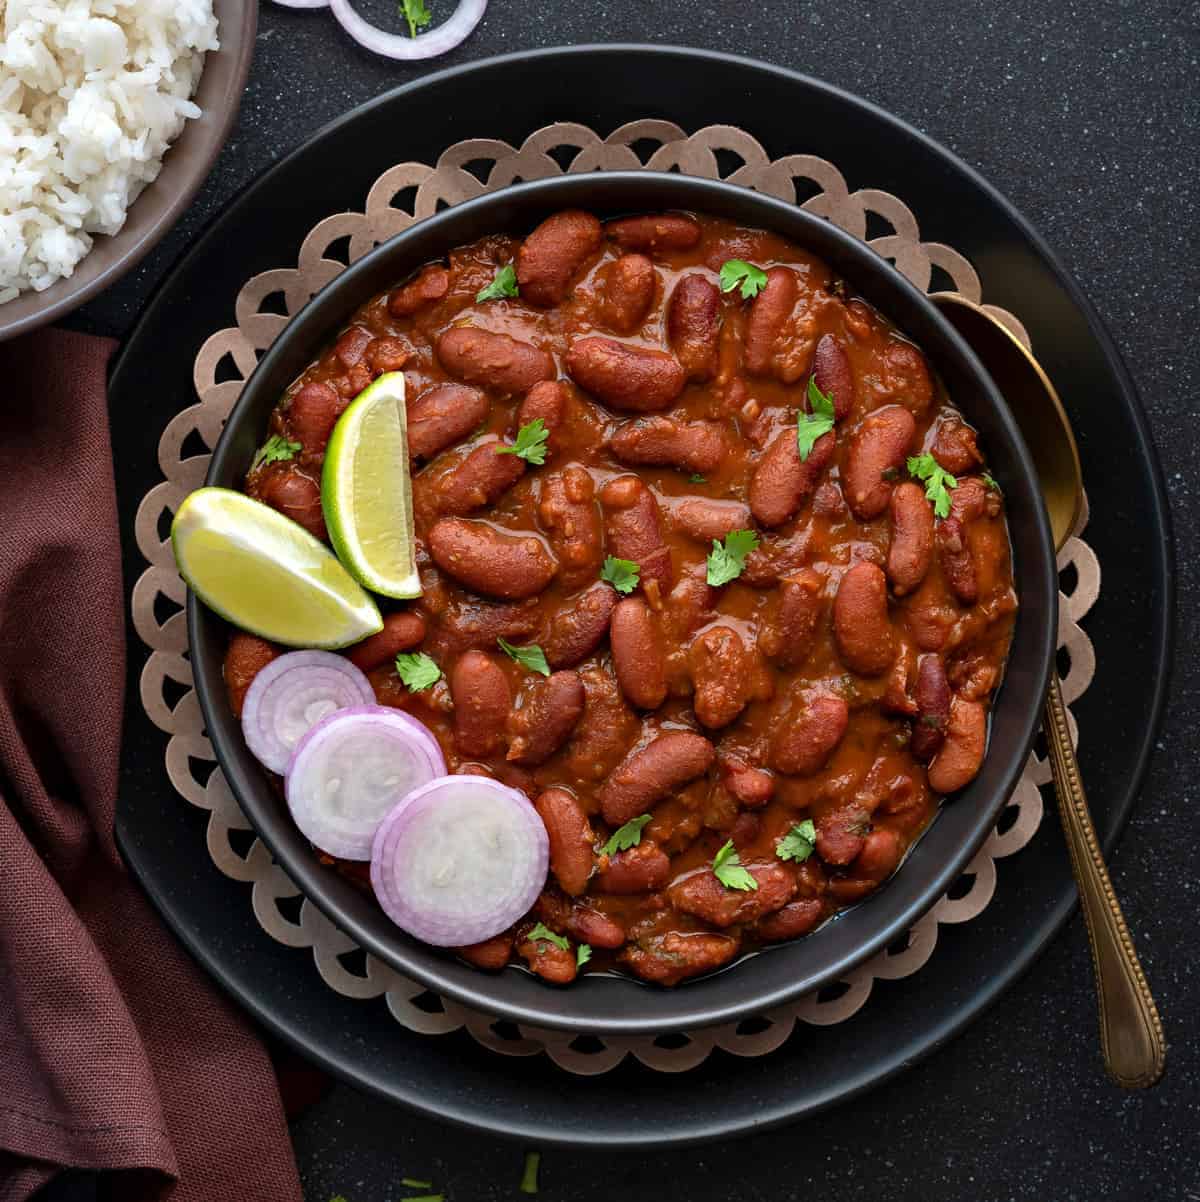  A pot of simmering Rajma Masala curry with visible spices and rich, thick gravy.